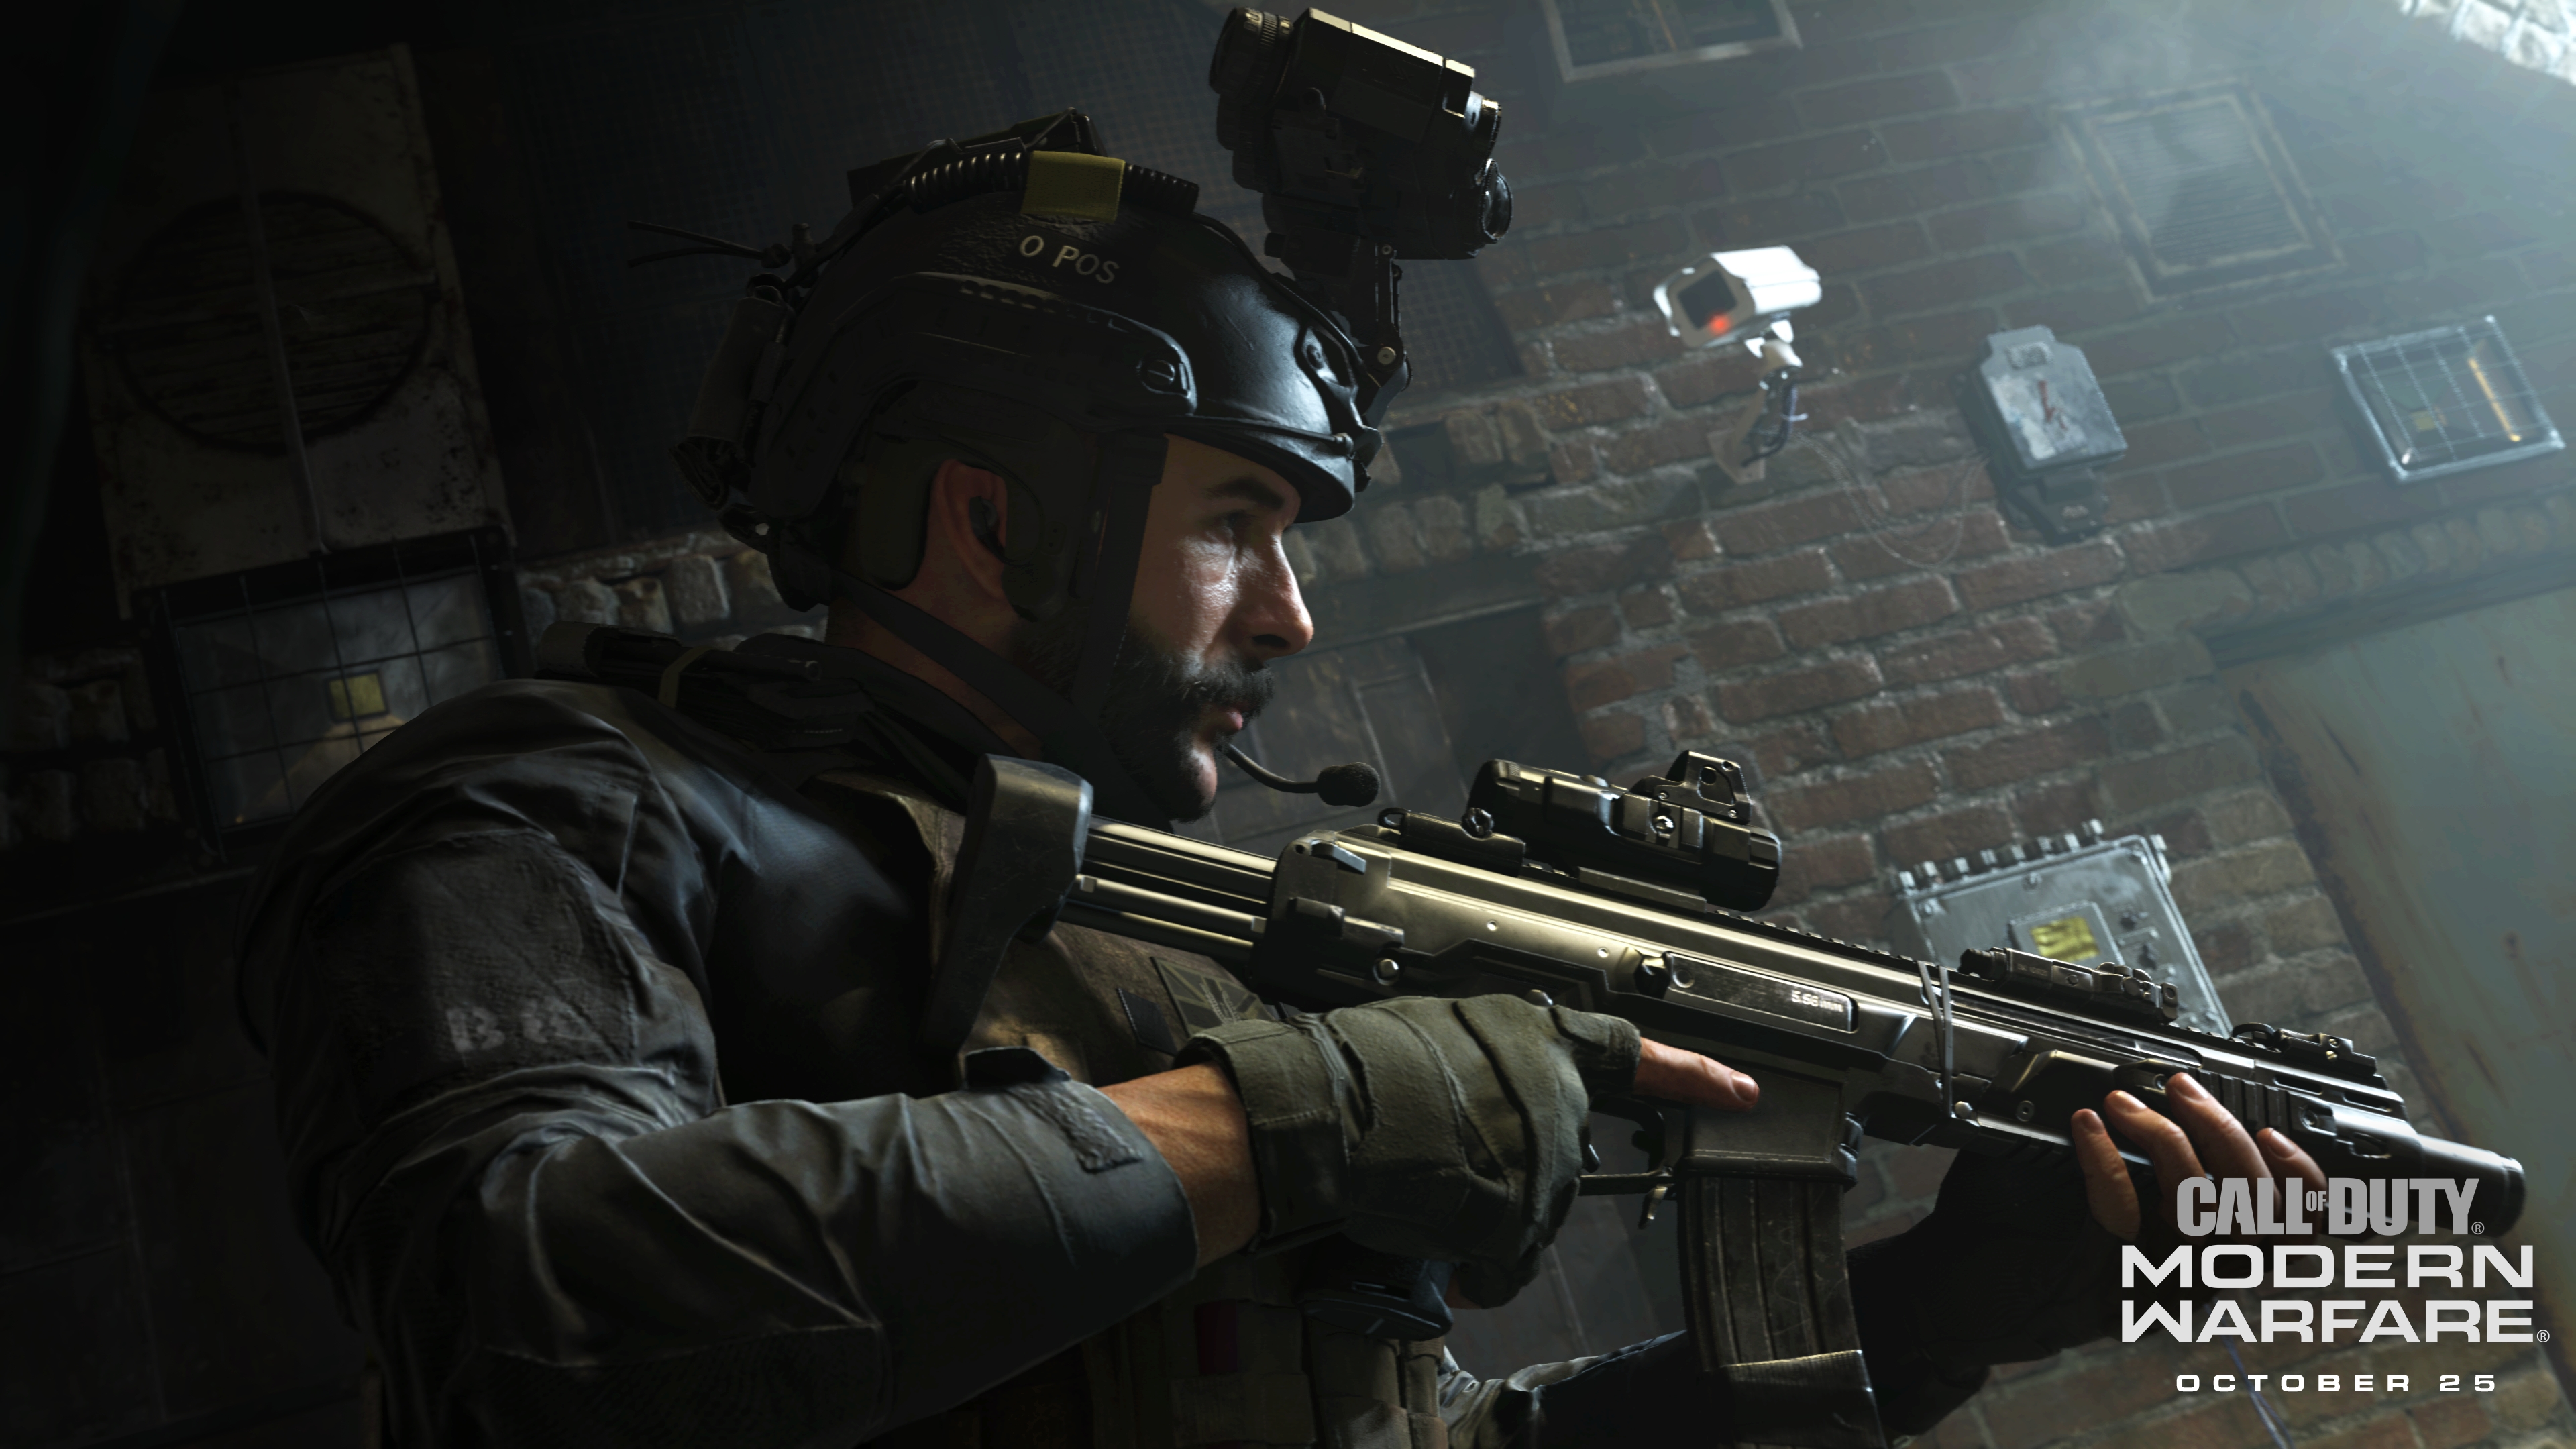 Call of Duty: Modern Warfare reimagined for PS4, Xbox One, and PC this October